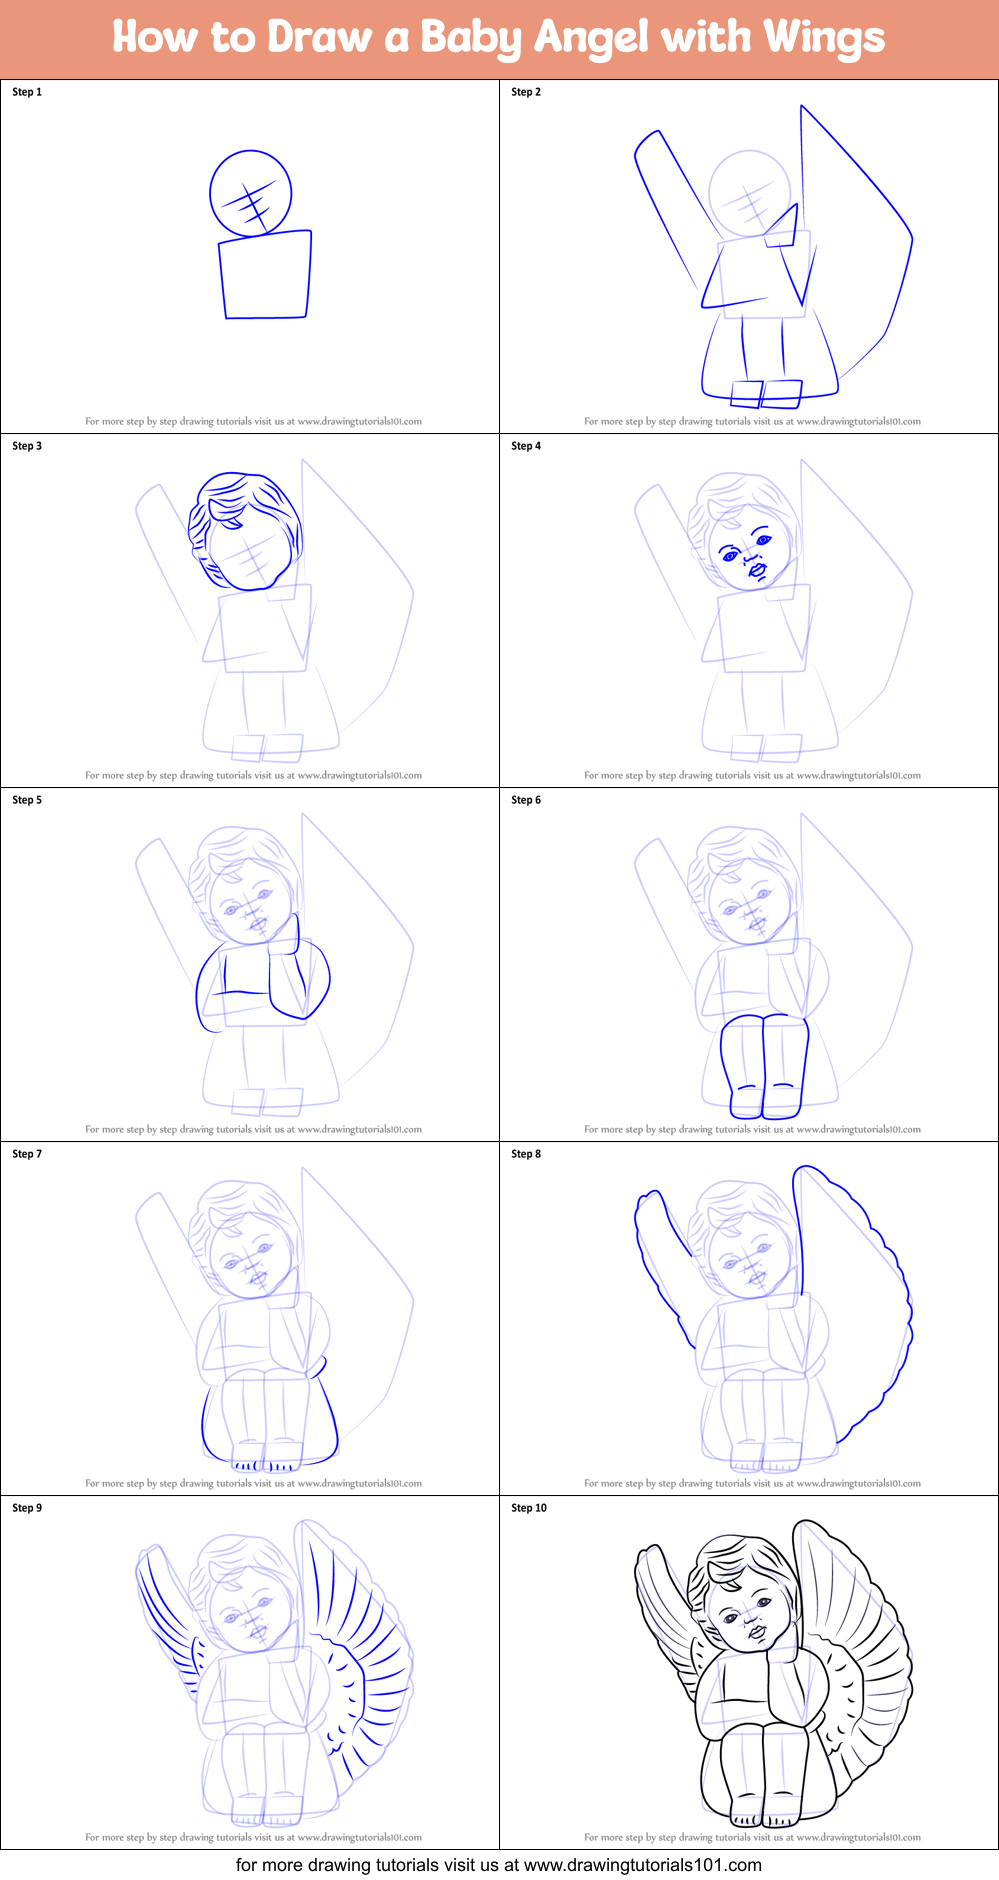 How to Draw a Baby Angel with Wings printable step by step drawing